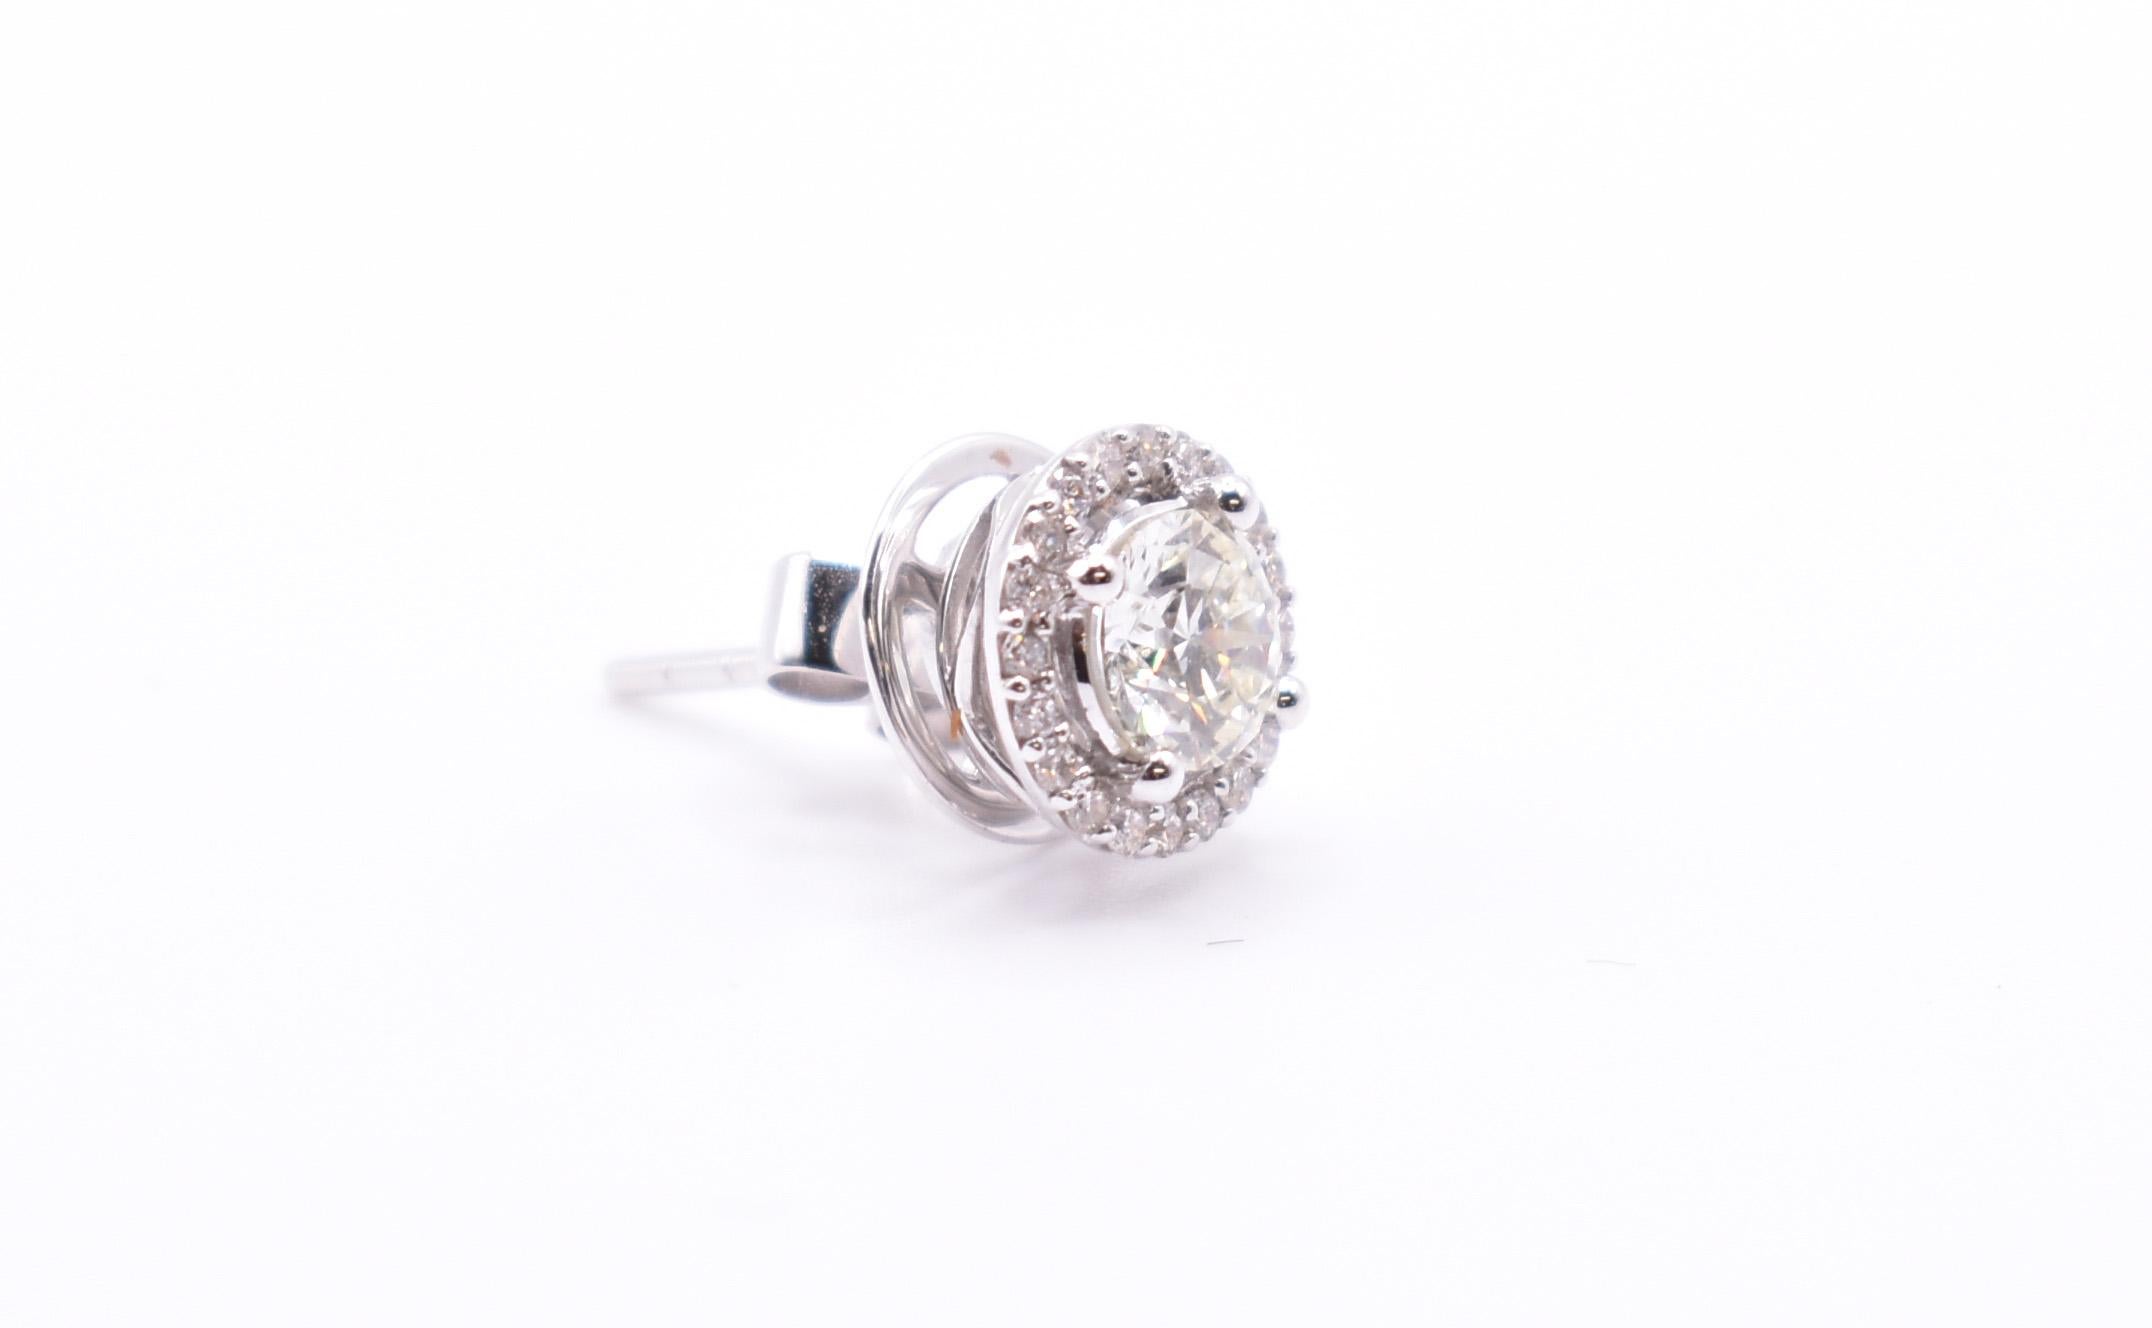 Pair of 18k White Gold 1.18 Carat Diamond Halo Stud Earrings In New Condition For Sale In Chelmsford, GB